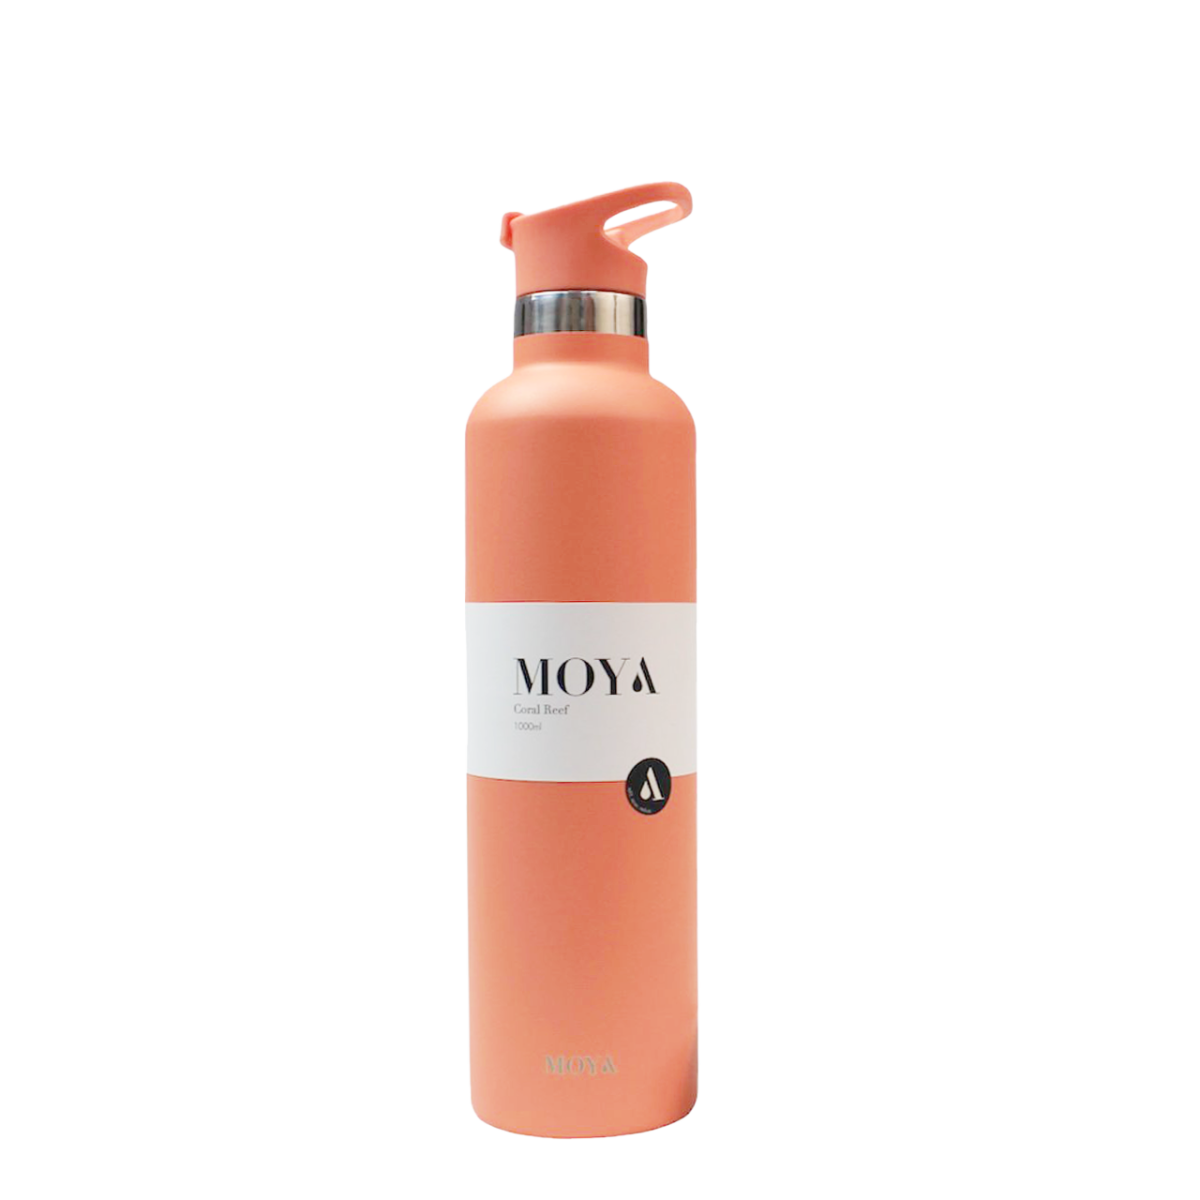 Moya "Coral Reef" 1L Insulated Sustainable Water Bottle Coral